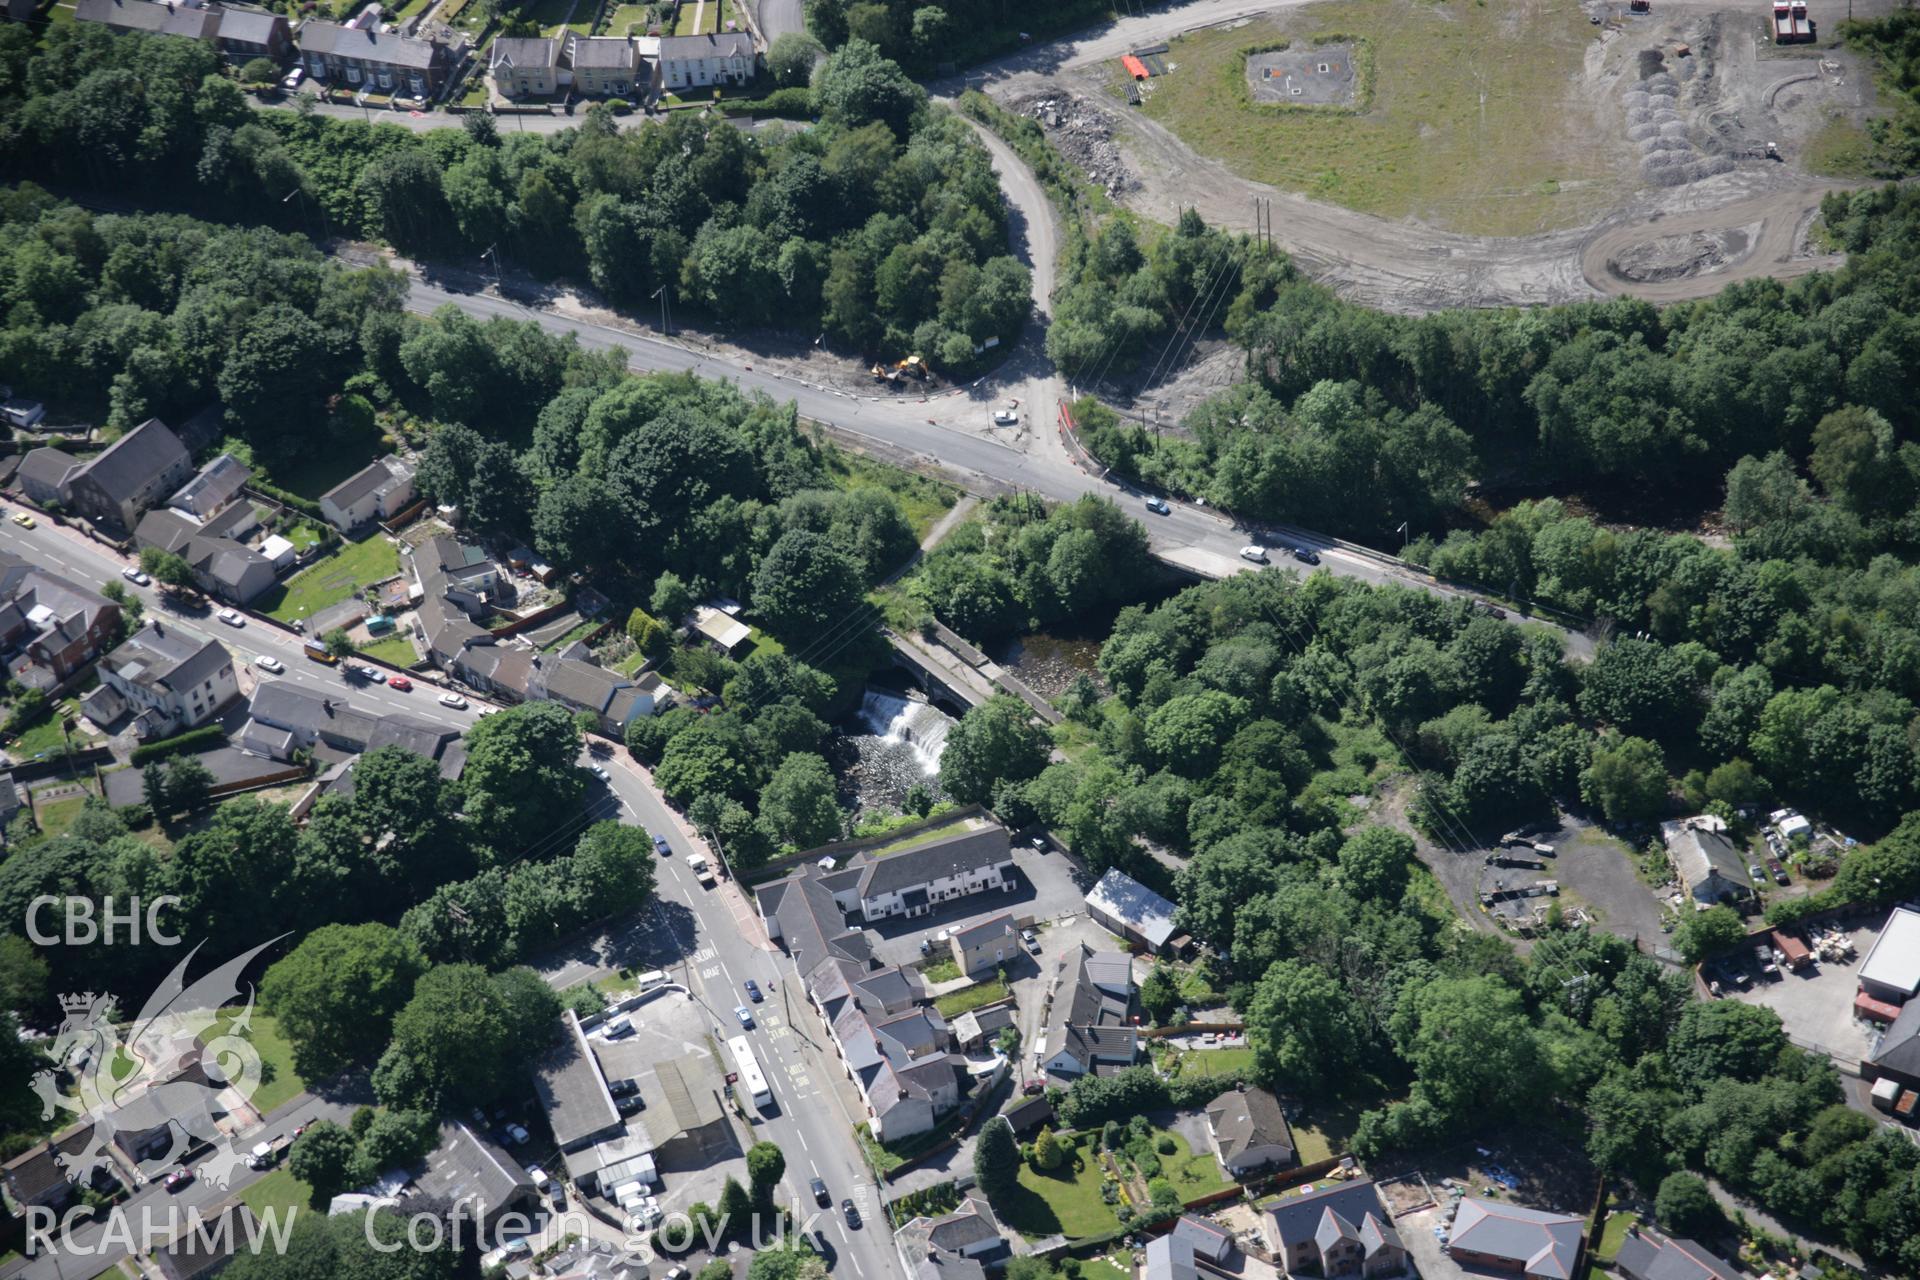 RCAHMW colour oblique aerial photograph of Ystalyfera Aqueduct and Weir, Swansea Canal. A view from the north-east. Taken on 22 June 2005 by Toby Driver